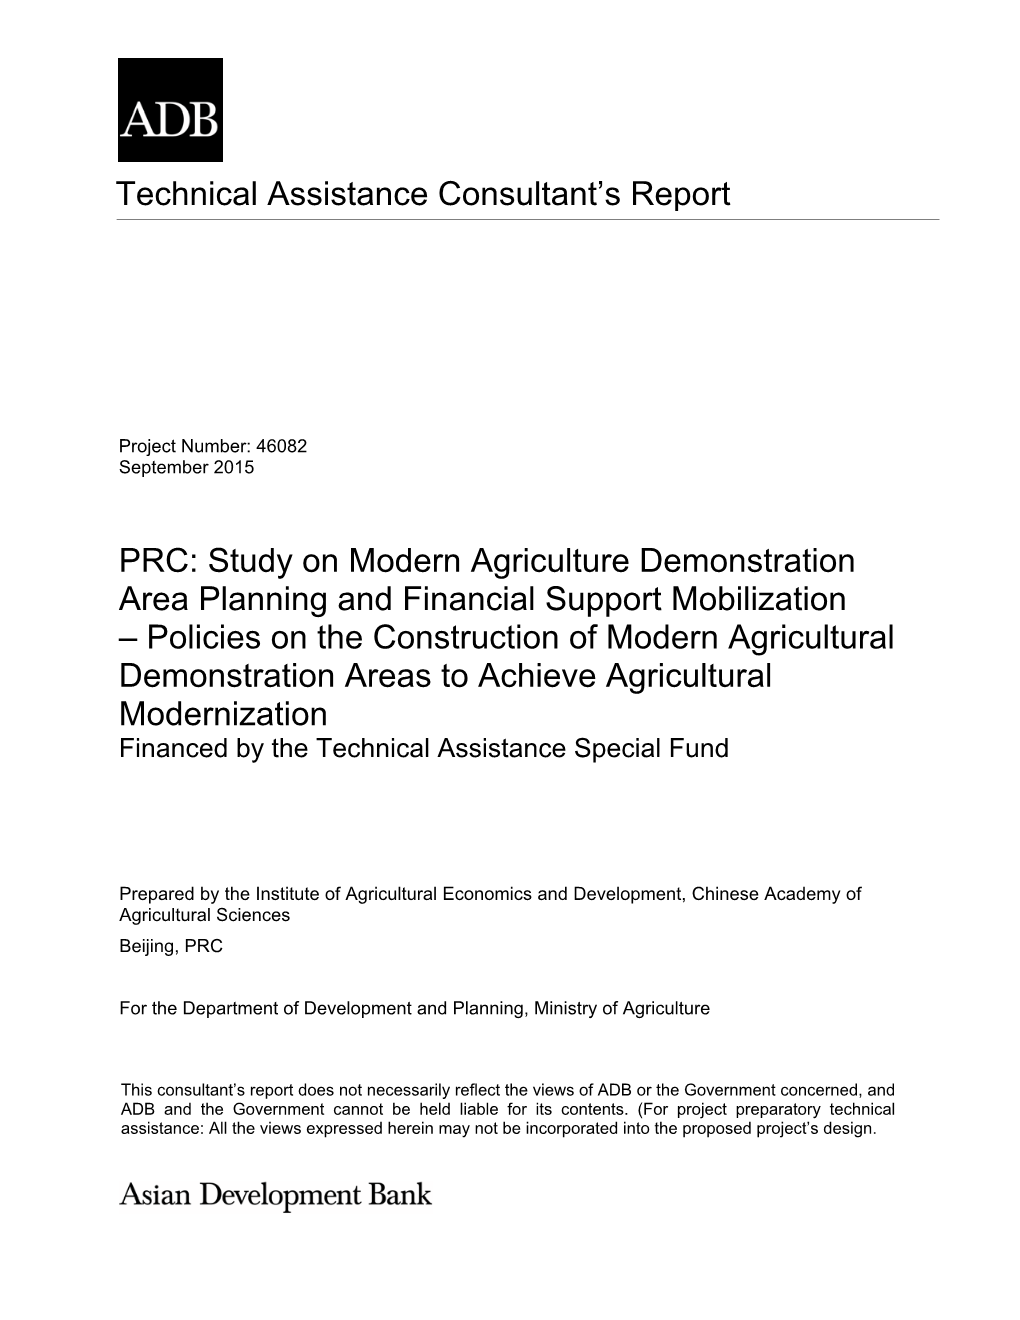 46082-001: Policies on the Construction of Modern Agricultural Demonstration Areas to Achieve Agricultural Modernization